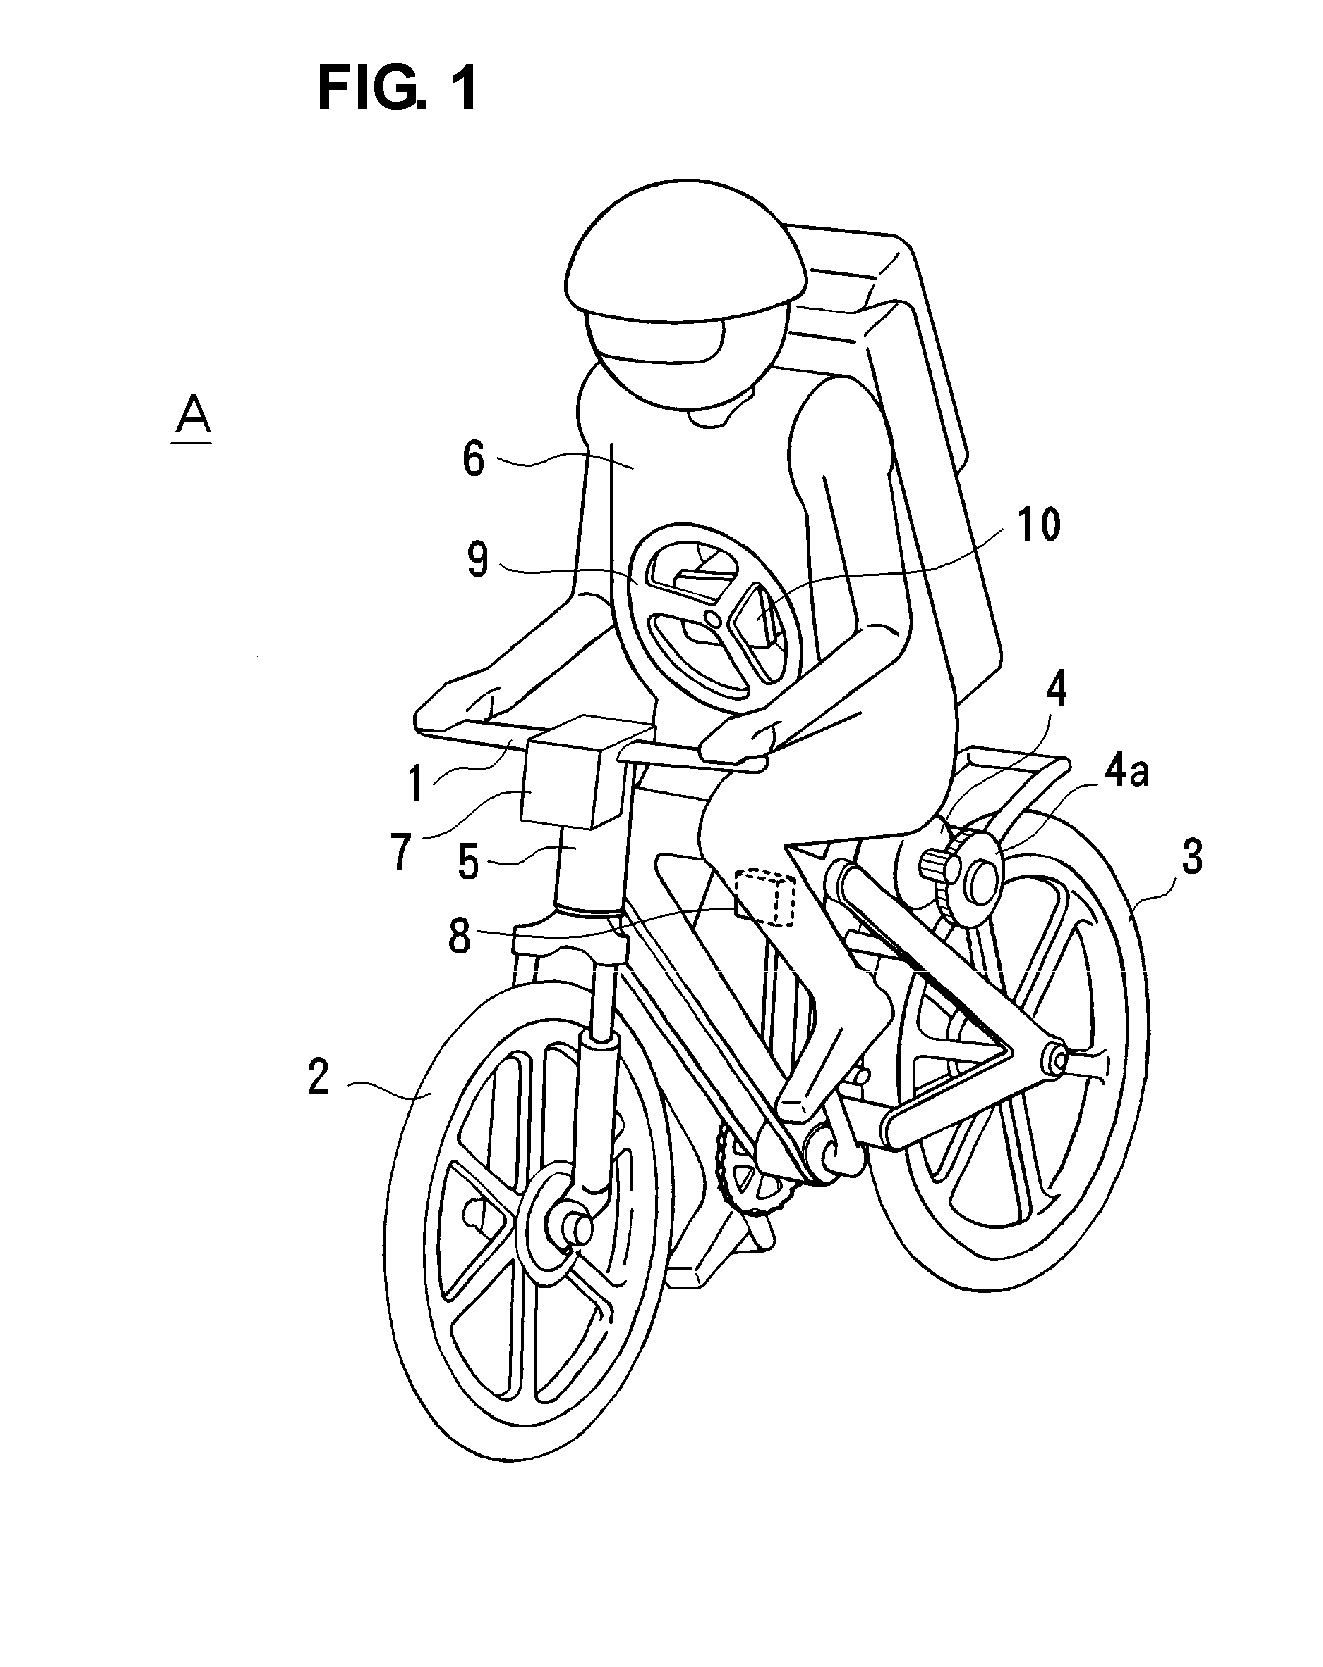 Overturn prevention control device for two-wheel vehicle